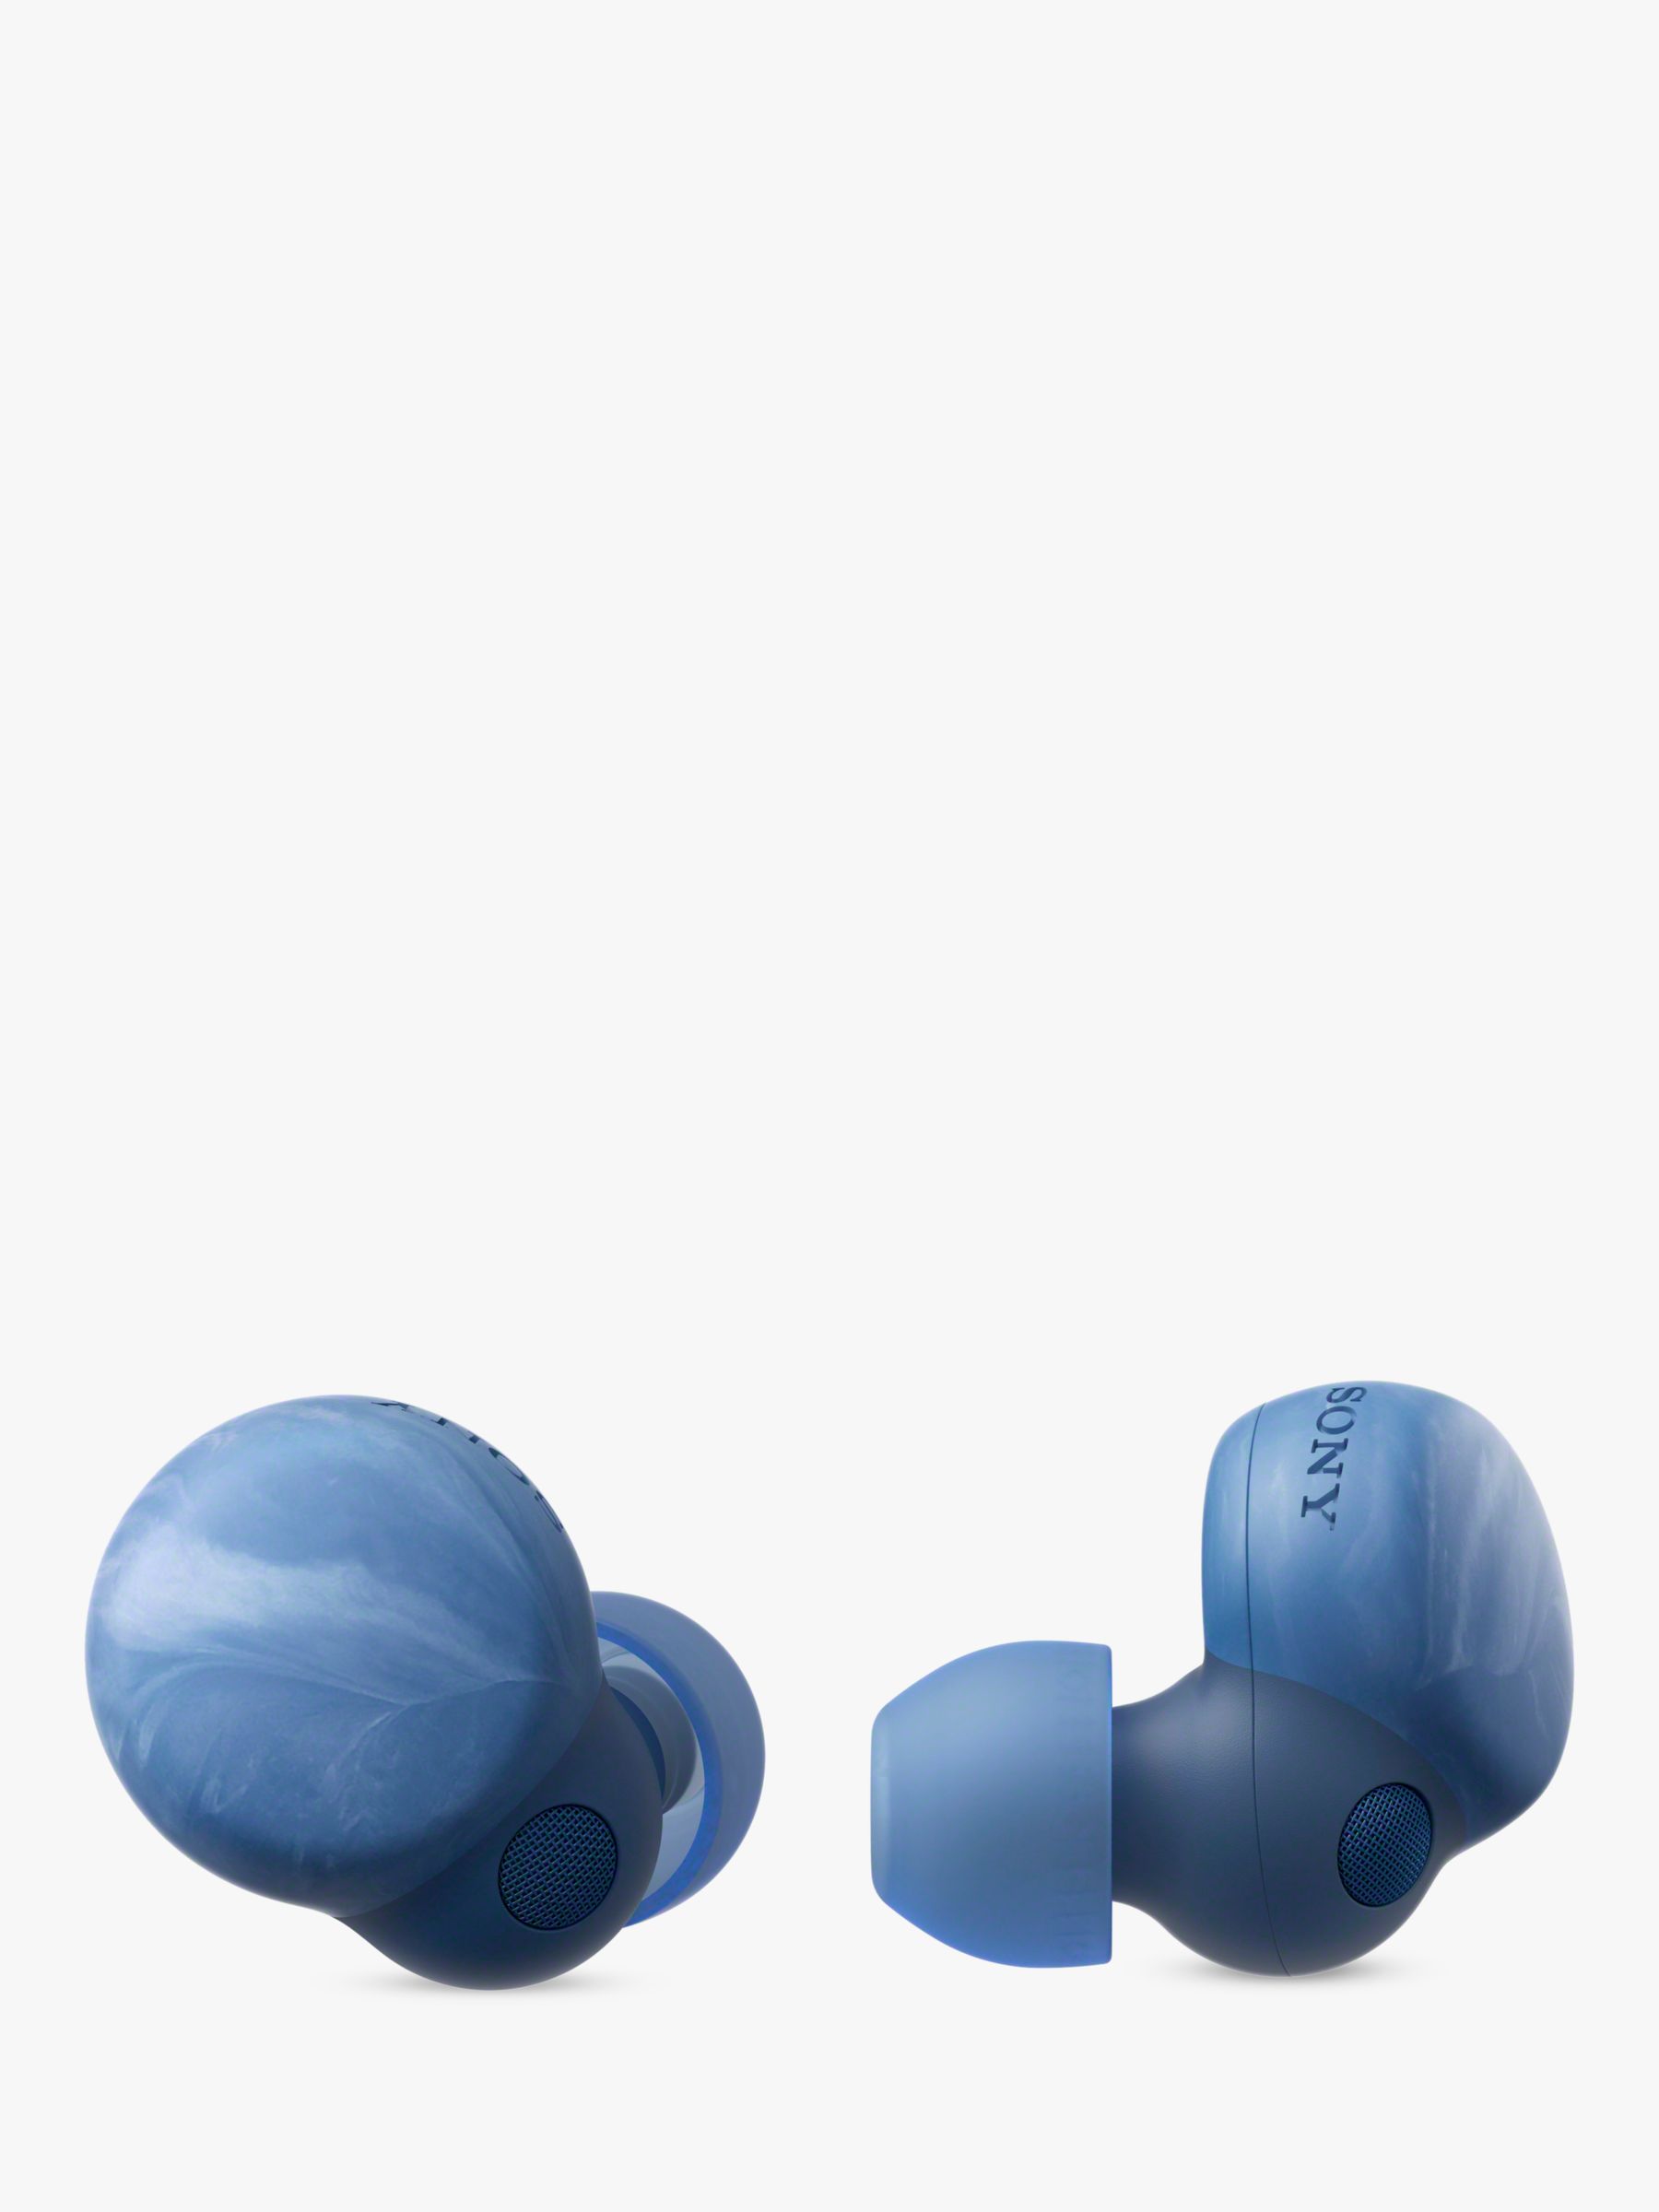  Sony LinkBuds S Truly Wireless Noise Cancelling Headphones -  Multipoint Connection - Ultra Light for All-Day Comfort with Crystal Clear  Call Quality - Up to 20 Hours Battery Life - EarthBlue : Electronics